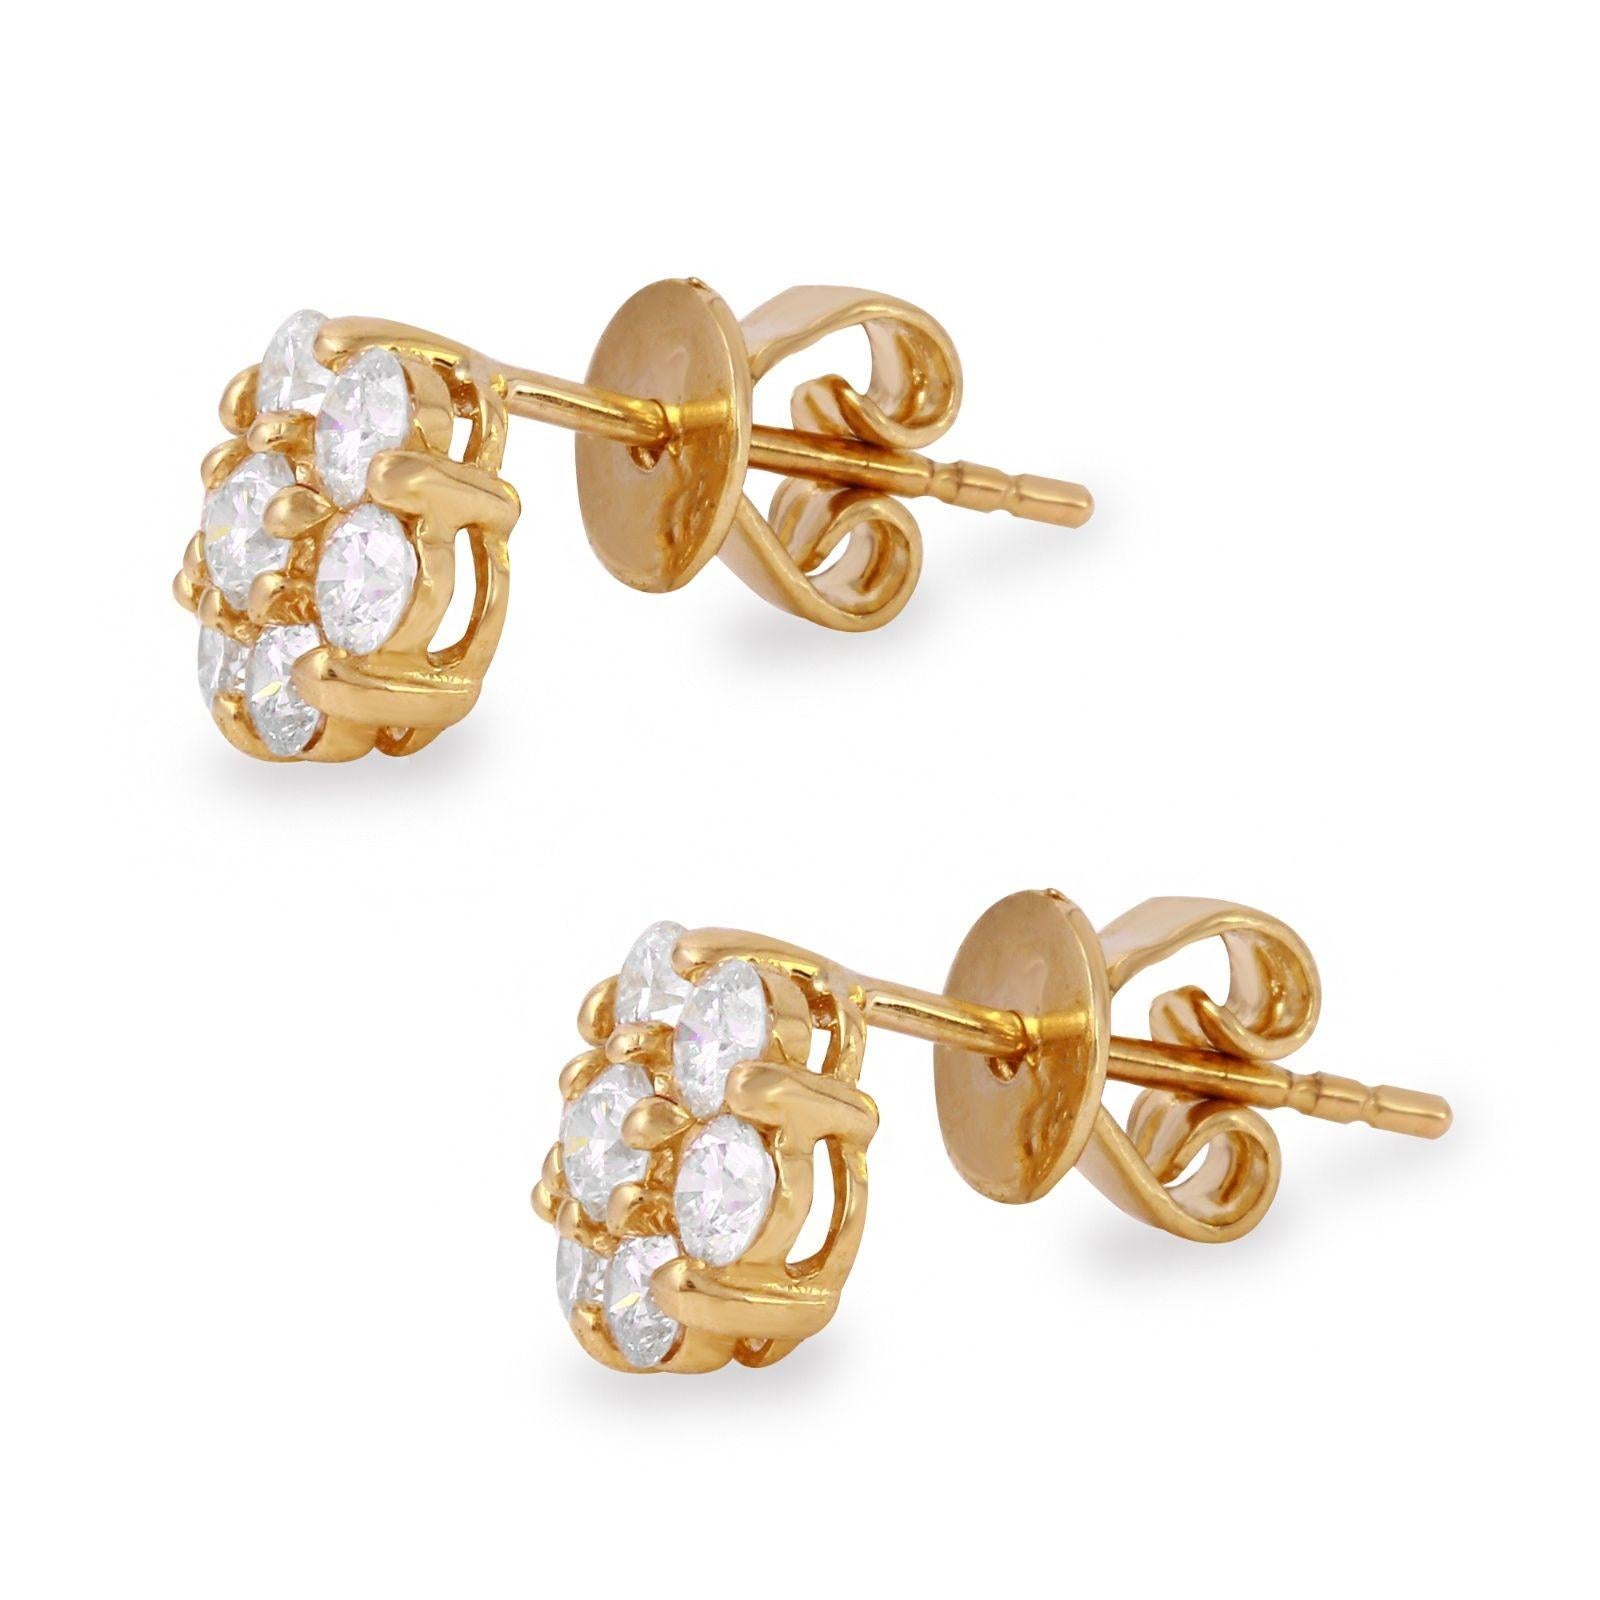 Exquisite 1.00 Carat Natural Diamond 14K Solid Yellow Gold Earrings

Amazing looking piece!

Total Natural Round Cut Diamonds Weight: 1.00 Carats (both earrings) SI1-SI2 / G-H

Diameter of the Earring is: 7.20mm

Total Earrings Weight is: 1.8